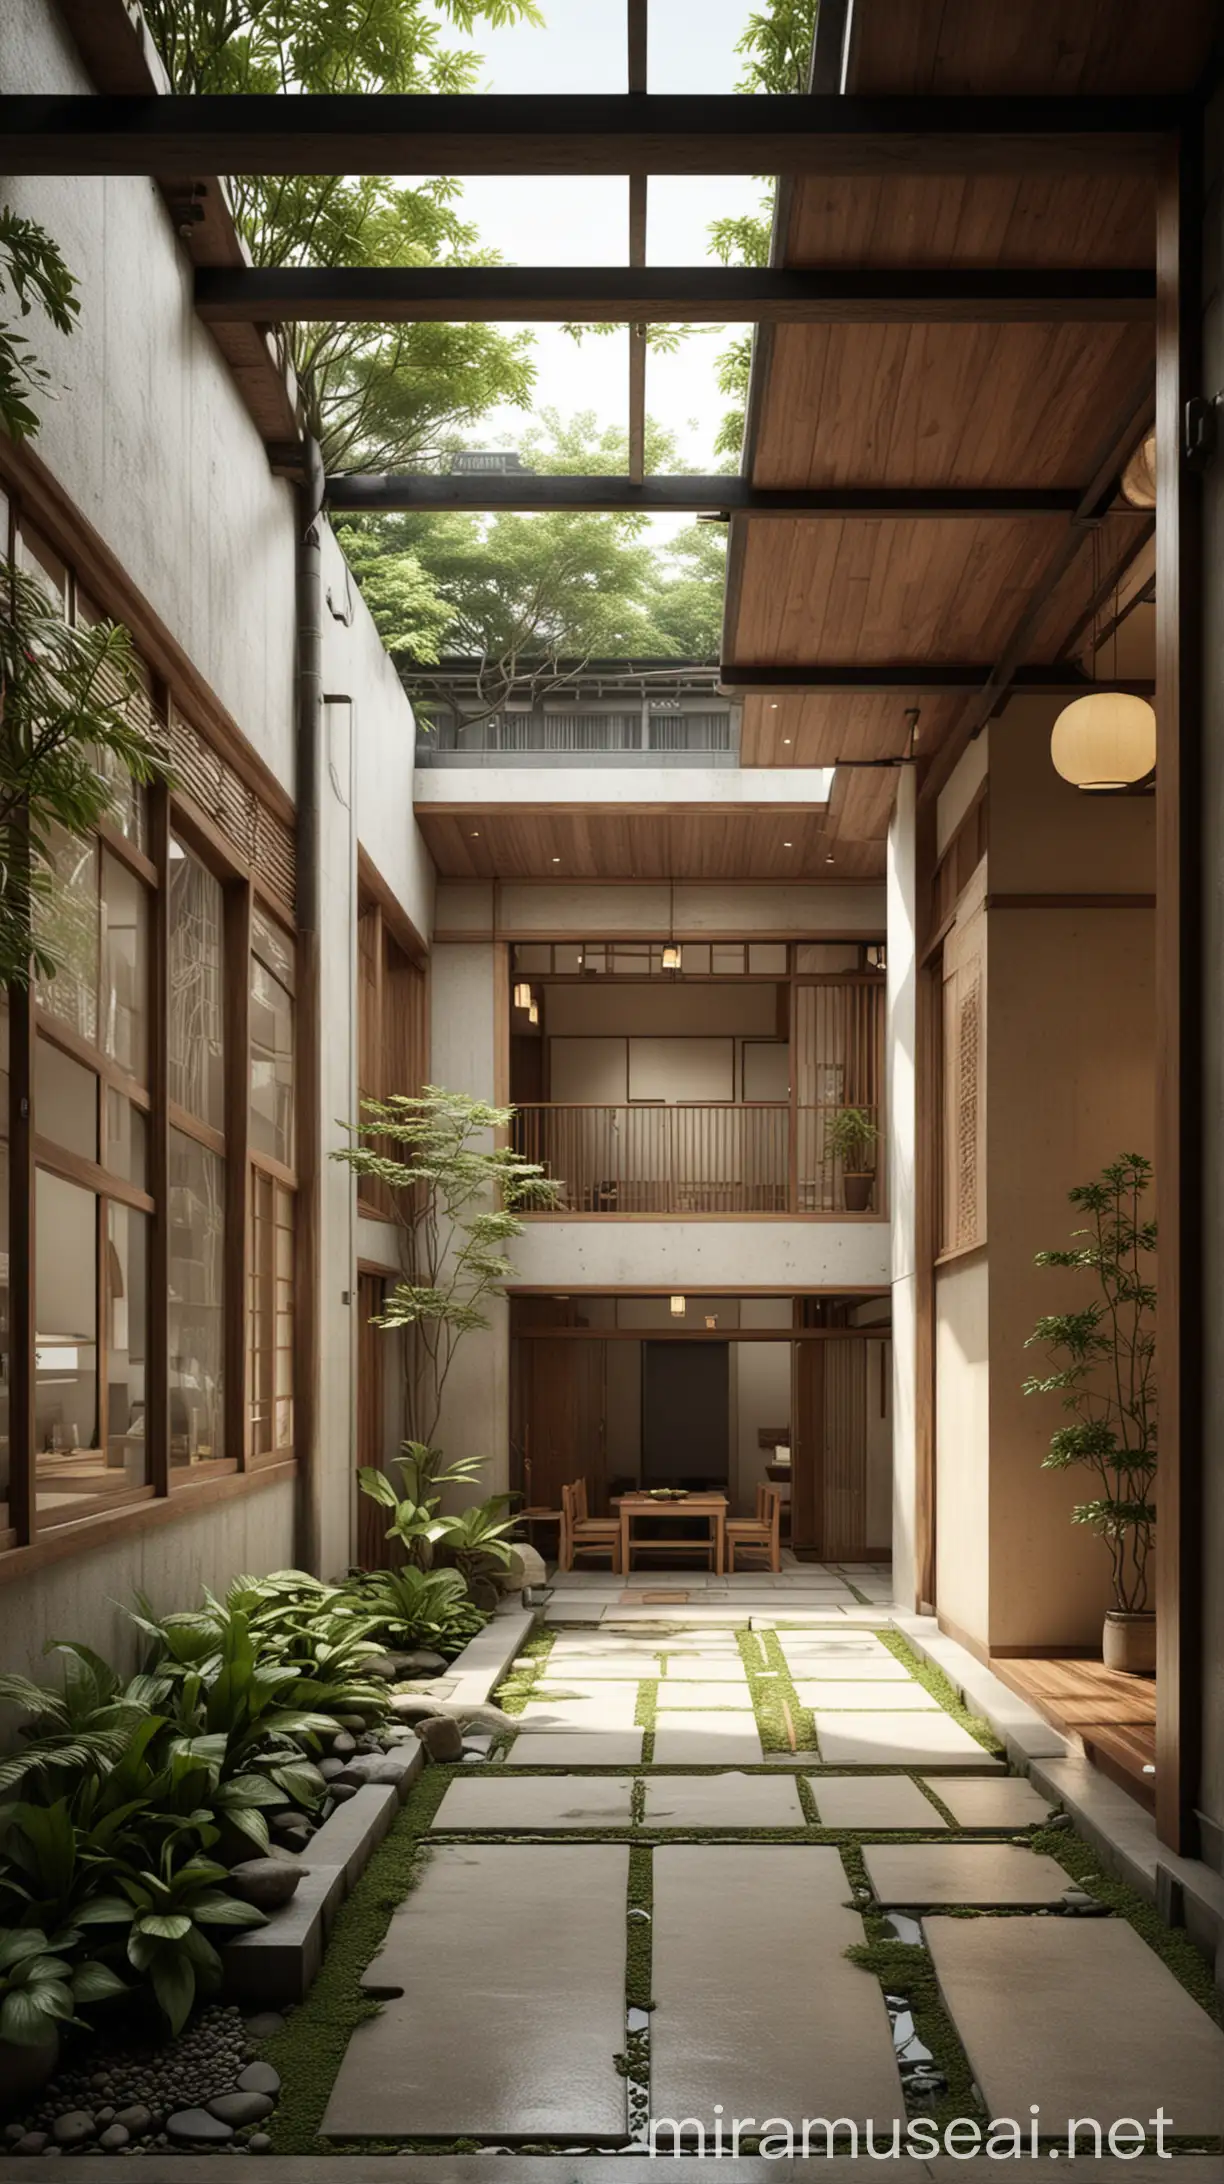 render of innercourt in modern japanese house in indonesia urban environtment